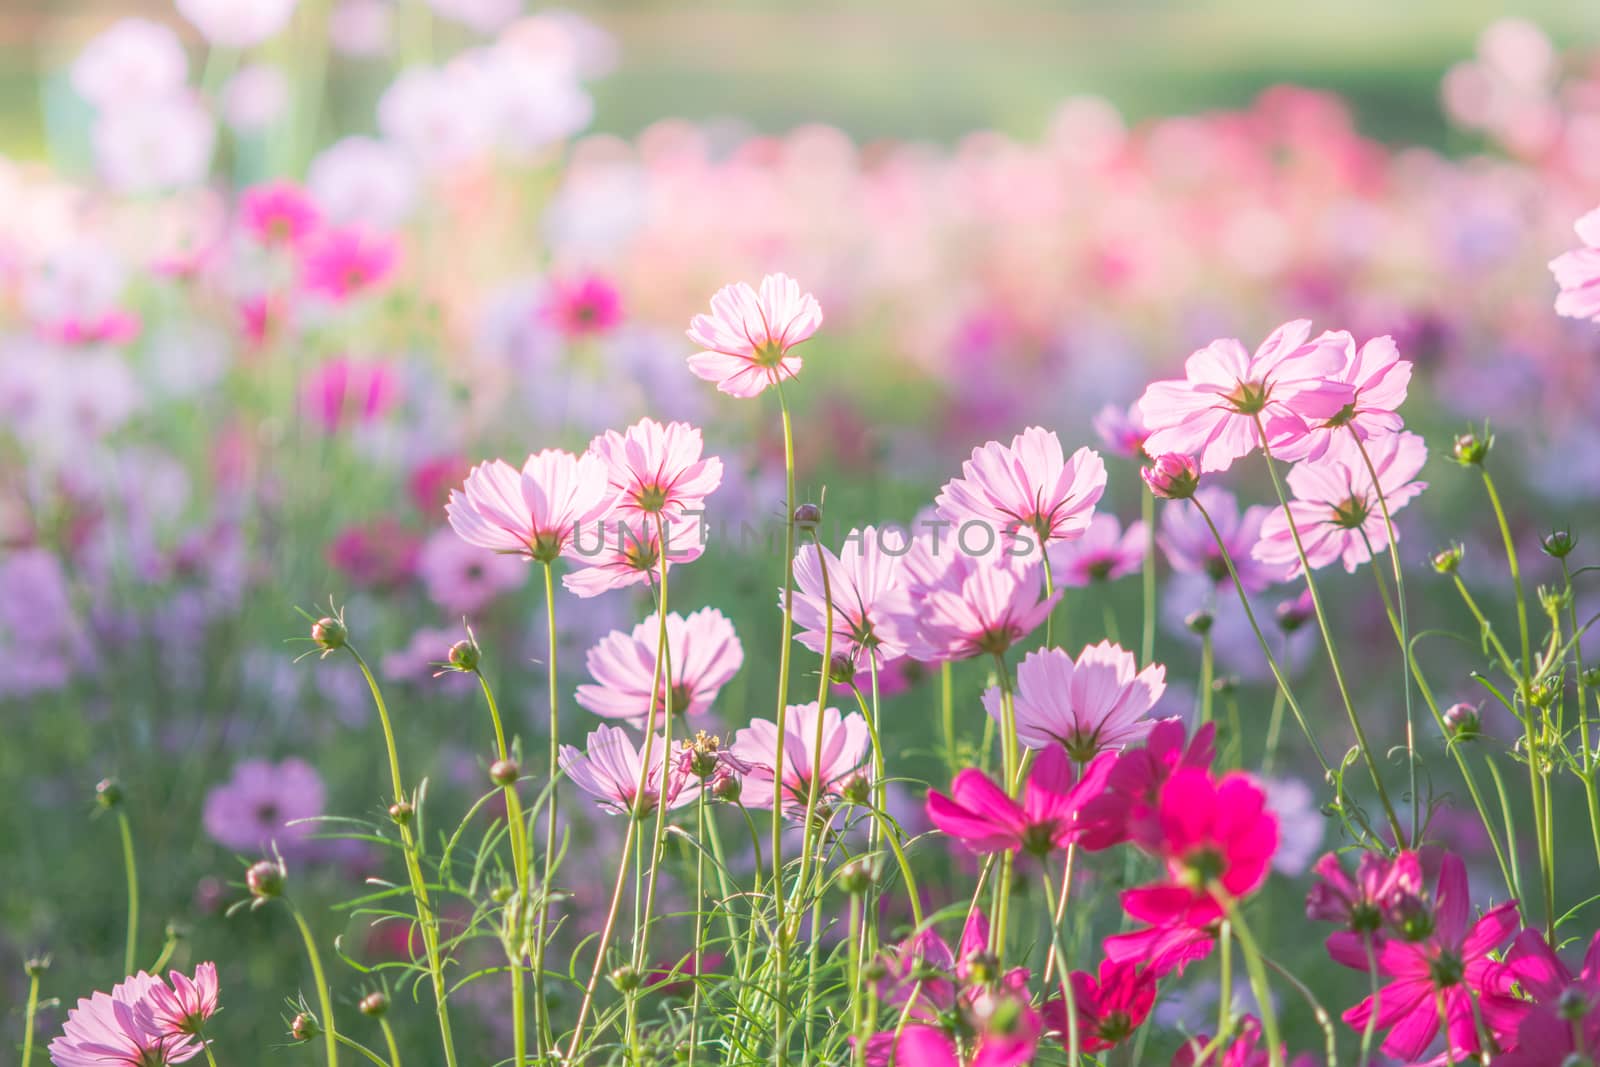 Soft, selective focus of Cosmos, blurry flower for background, c by yuiyuize